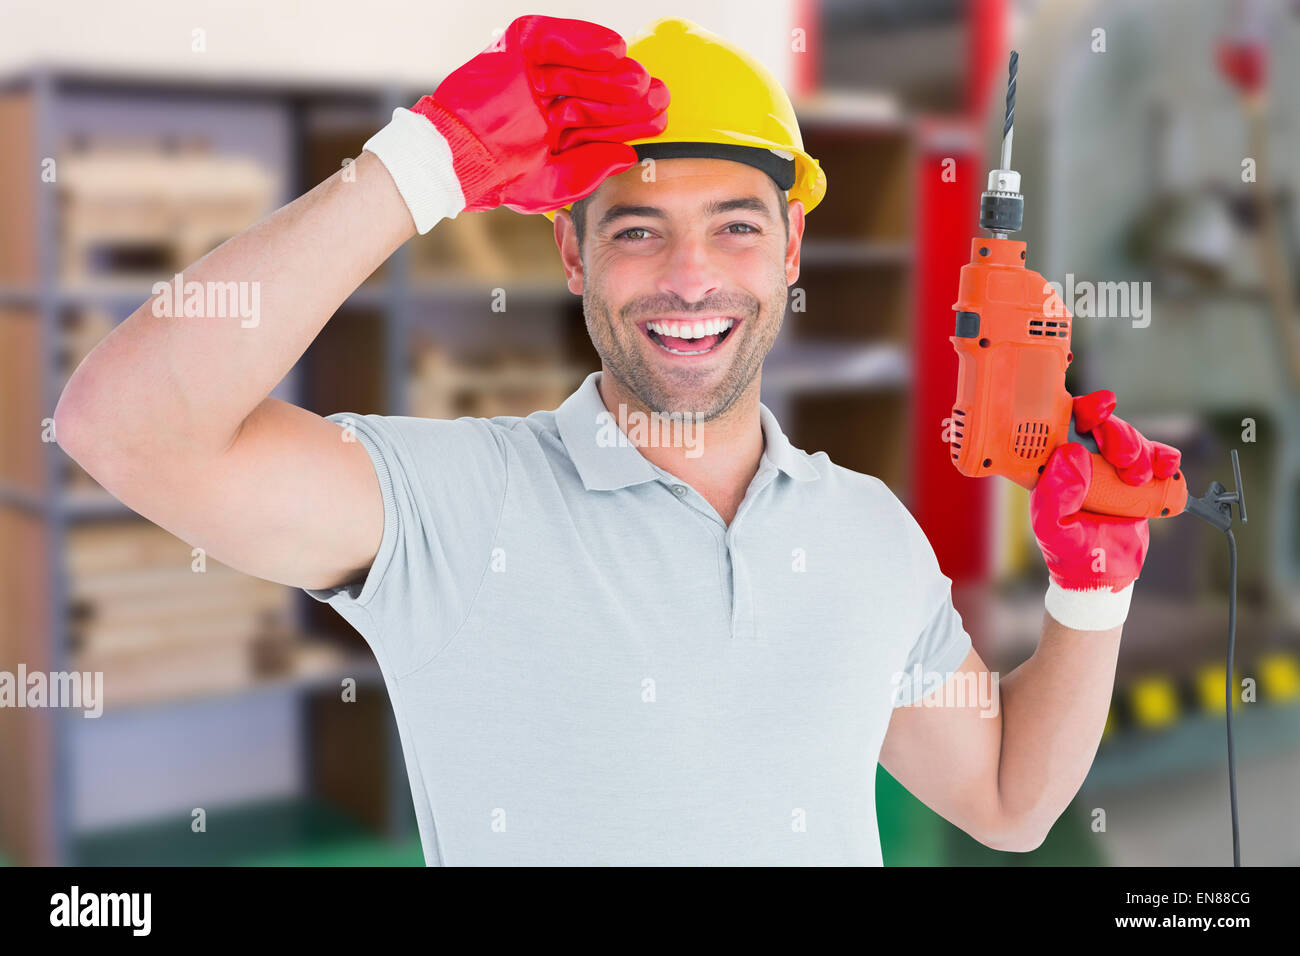 Composite image of smiling manual worker holding drill machine Stock Photo